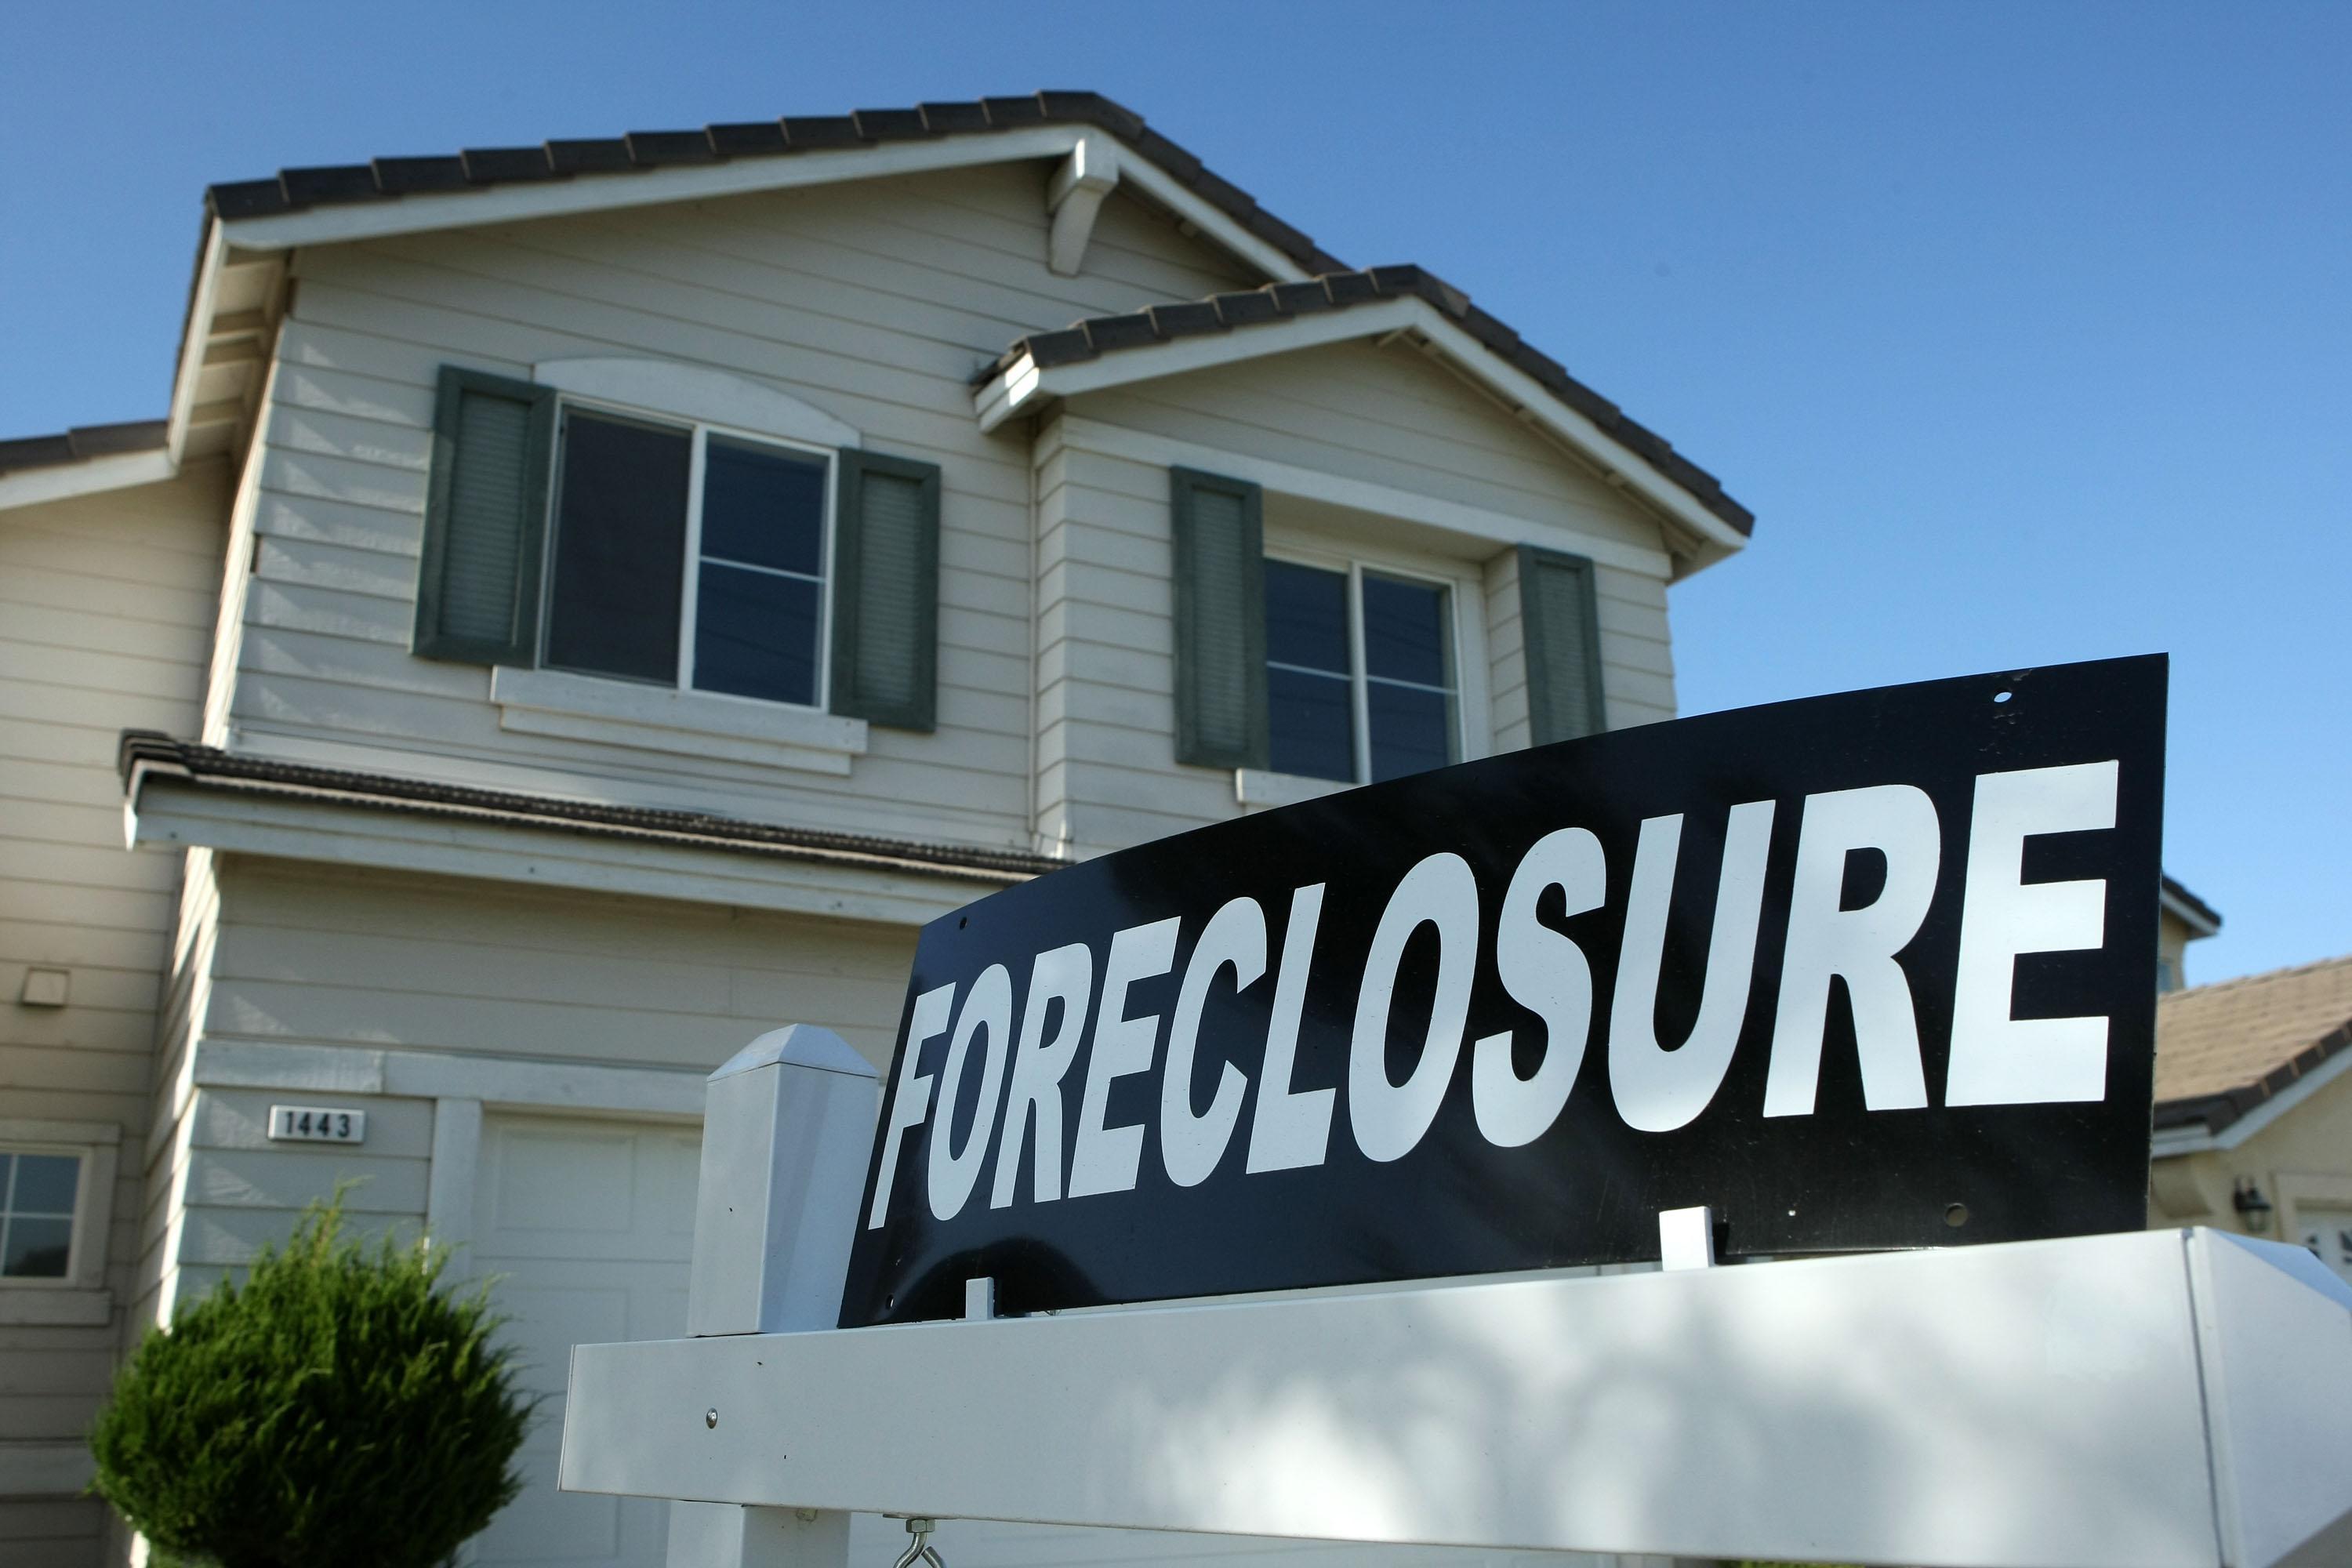 Maintaining Your Foreclosure Home